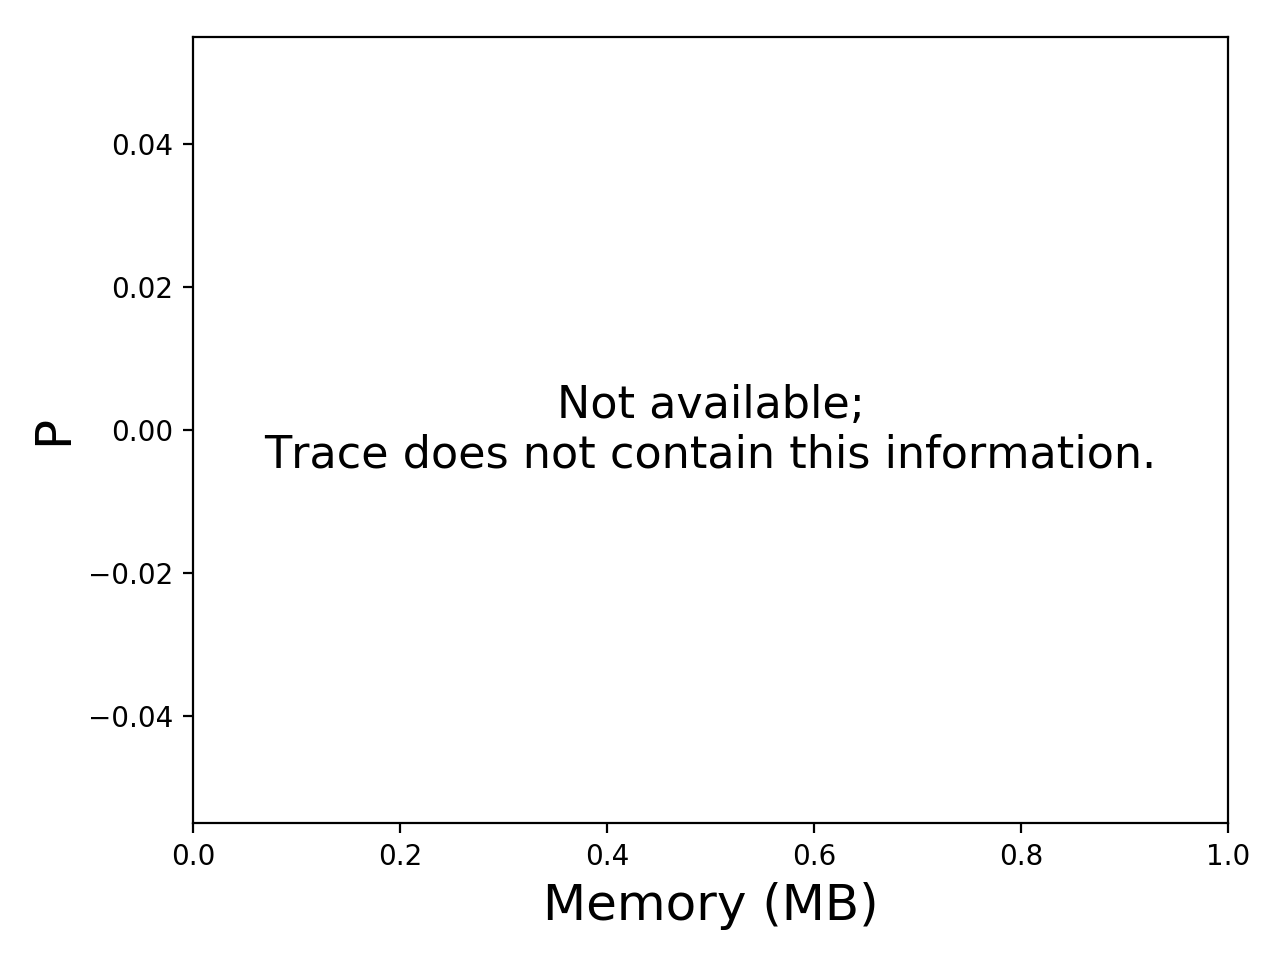 Task memory consumption graph for the Pegasus_P8 trace.